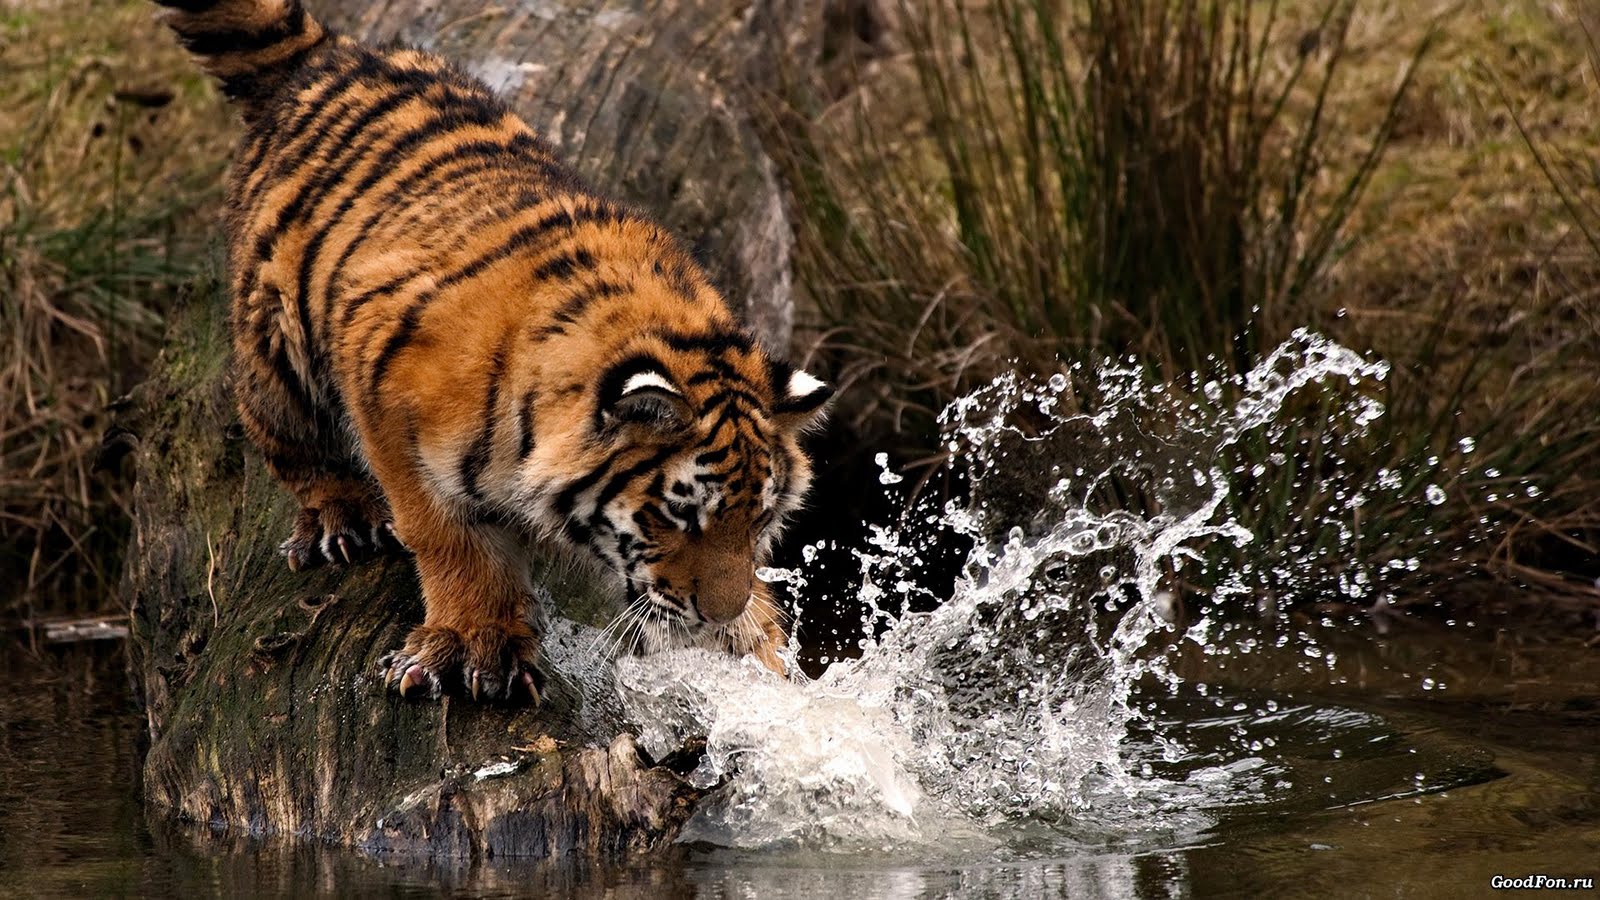 Cool Tiger Wallpapers - Widescreen HD Wallpapers